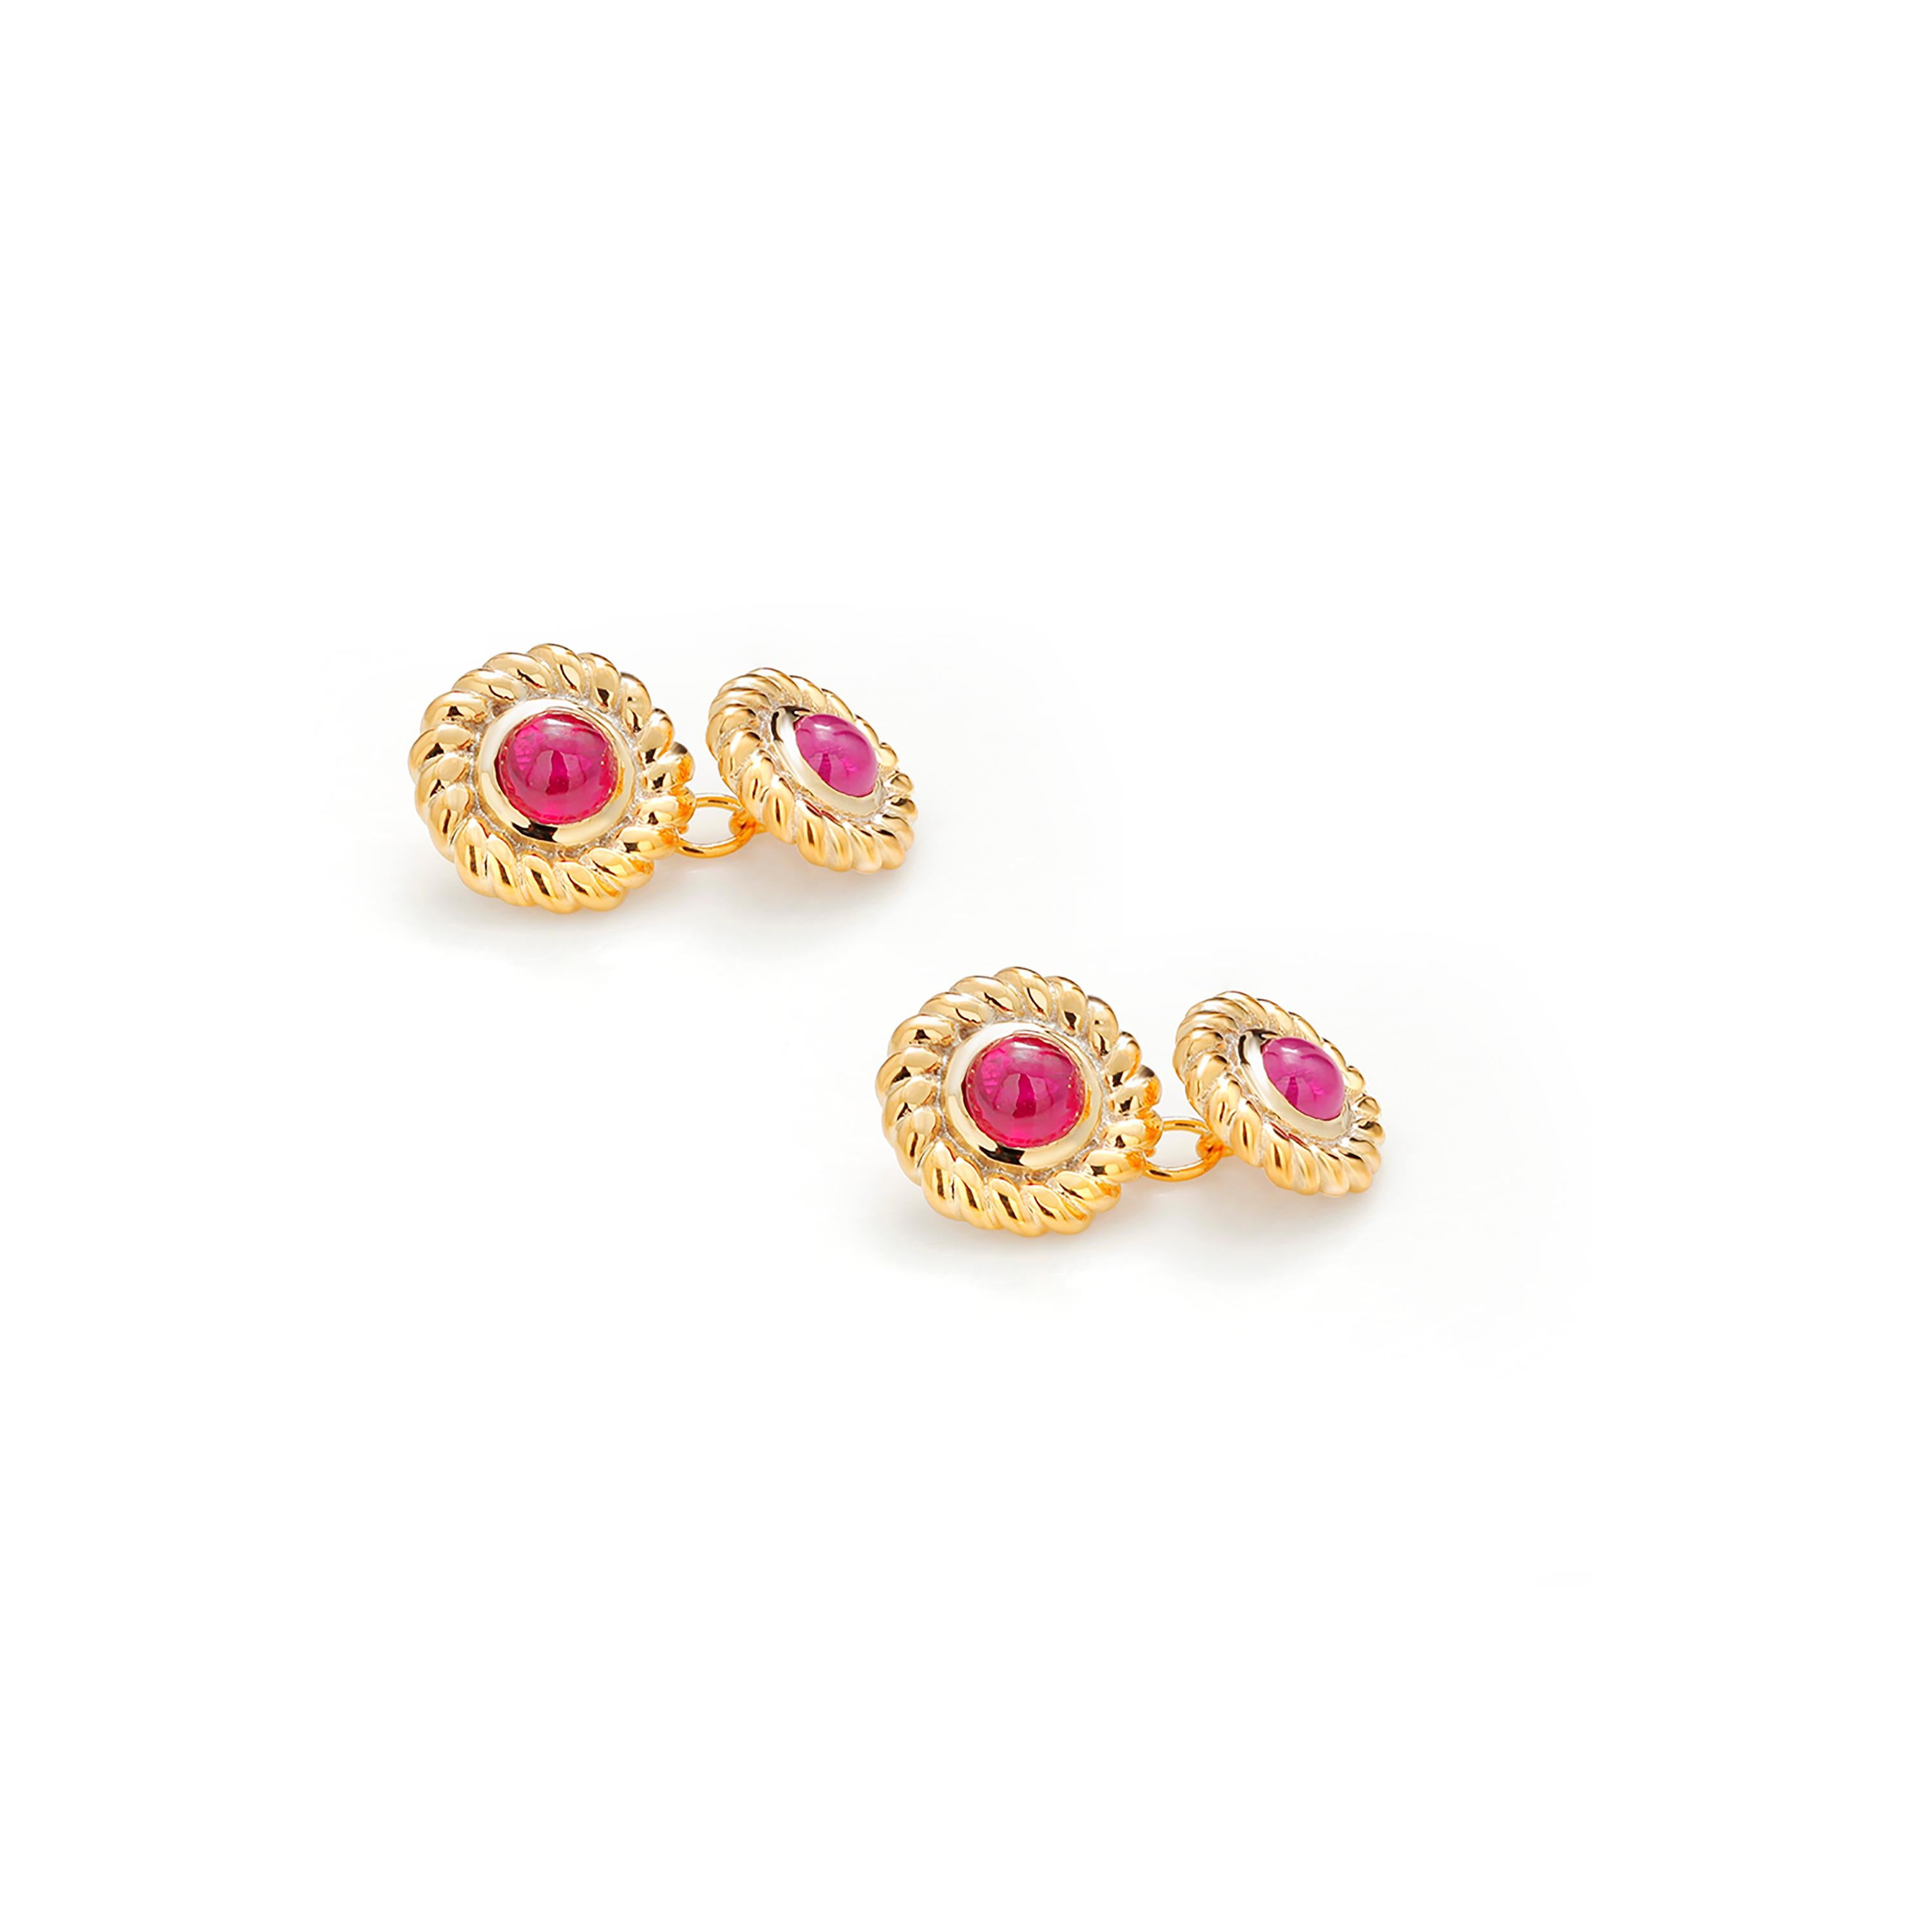 Fourteen karats yellow gold fabulous pair of matched men’s double-sided chain link cufflinks
Four matching vibrant and vivid cabochons red ruby weighing 2.75 carats
The rubies tone color is of full-bodied crimson red hue
Chain Link measures